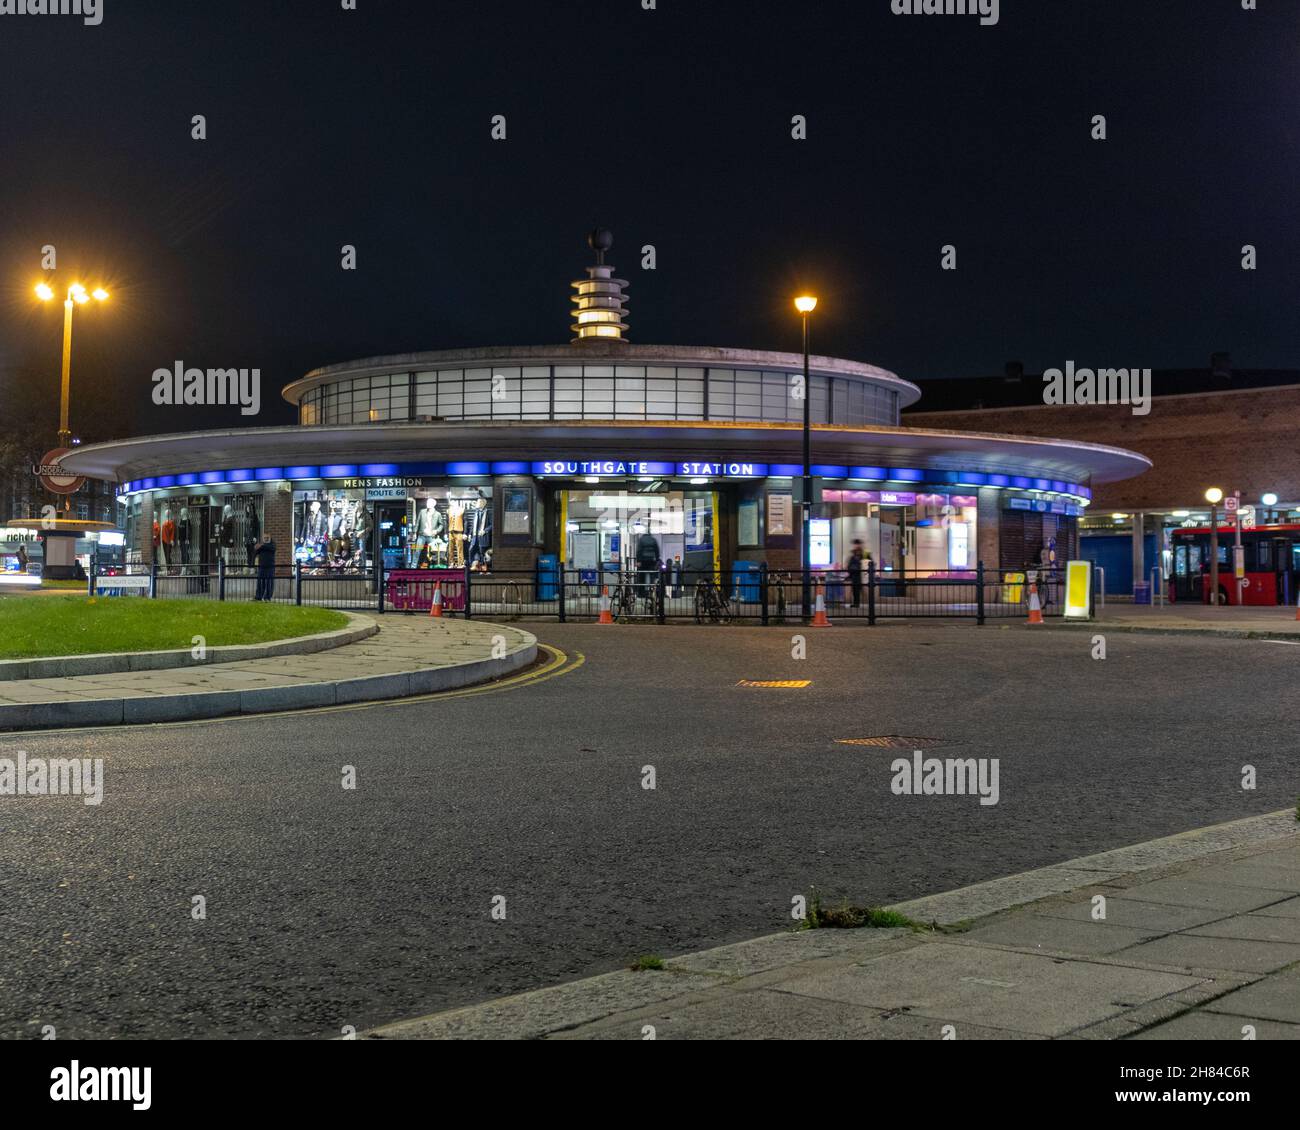 A night shot of Southgate tube station with the road in the foreground. The station is an Art Deco station designed by Charles holden. Piccadilly line Stock Photo